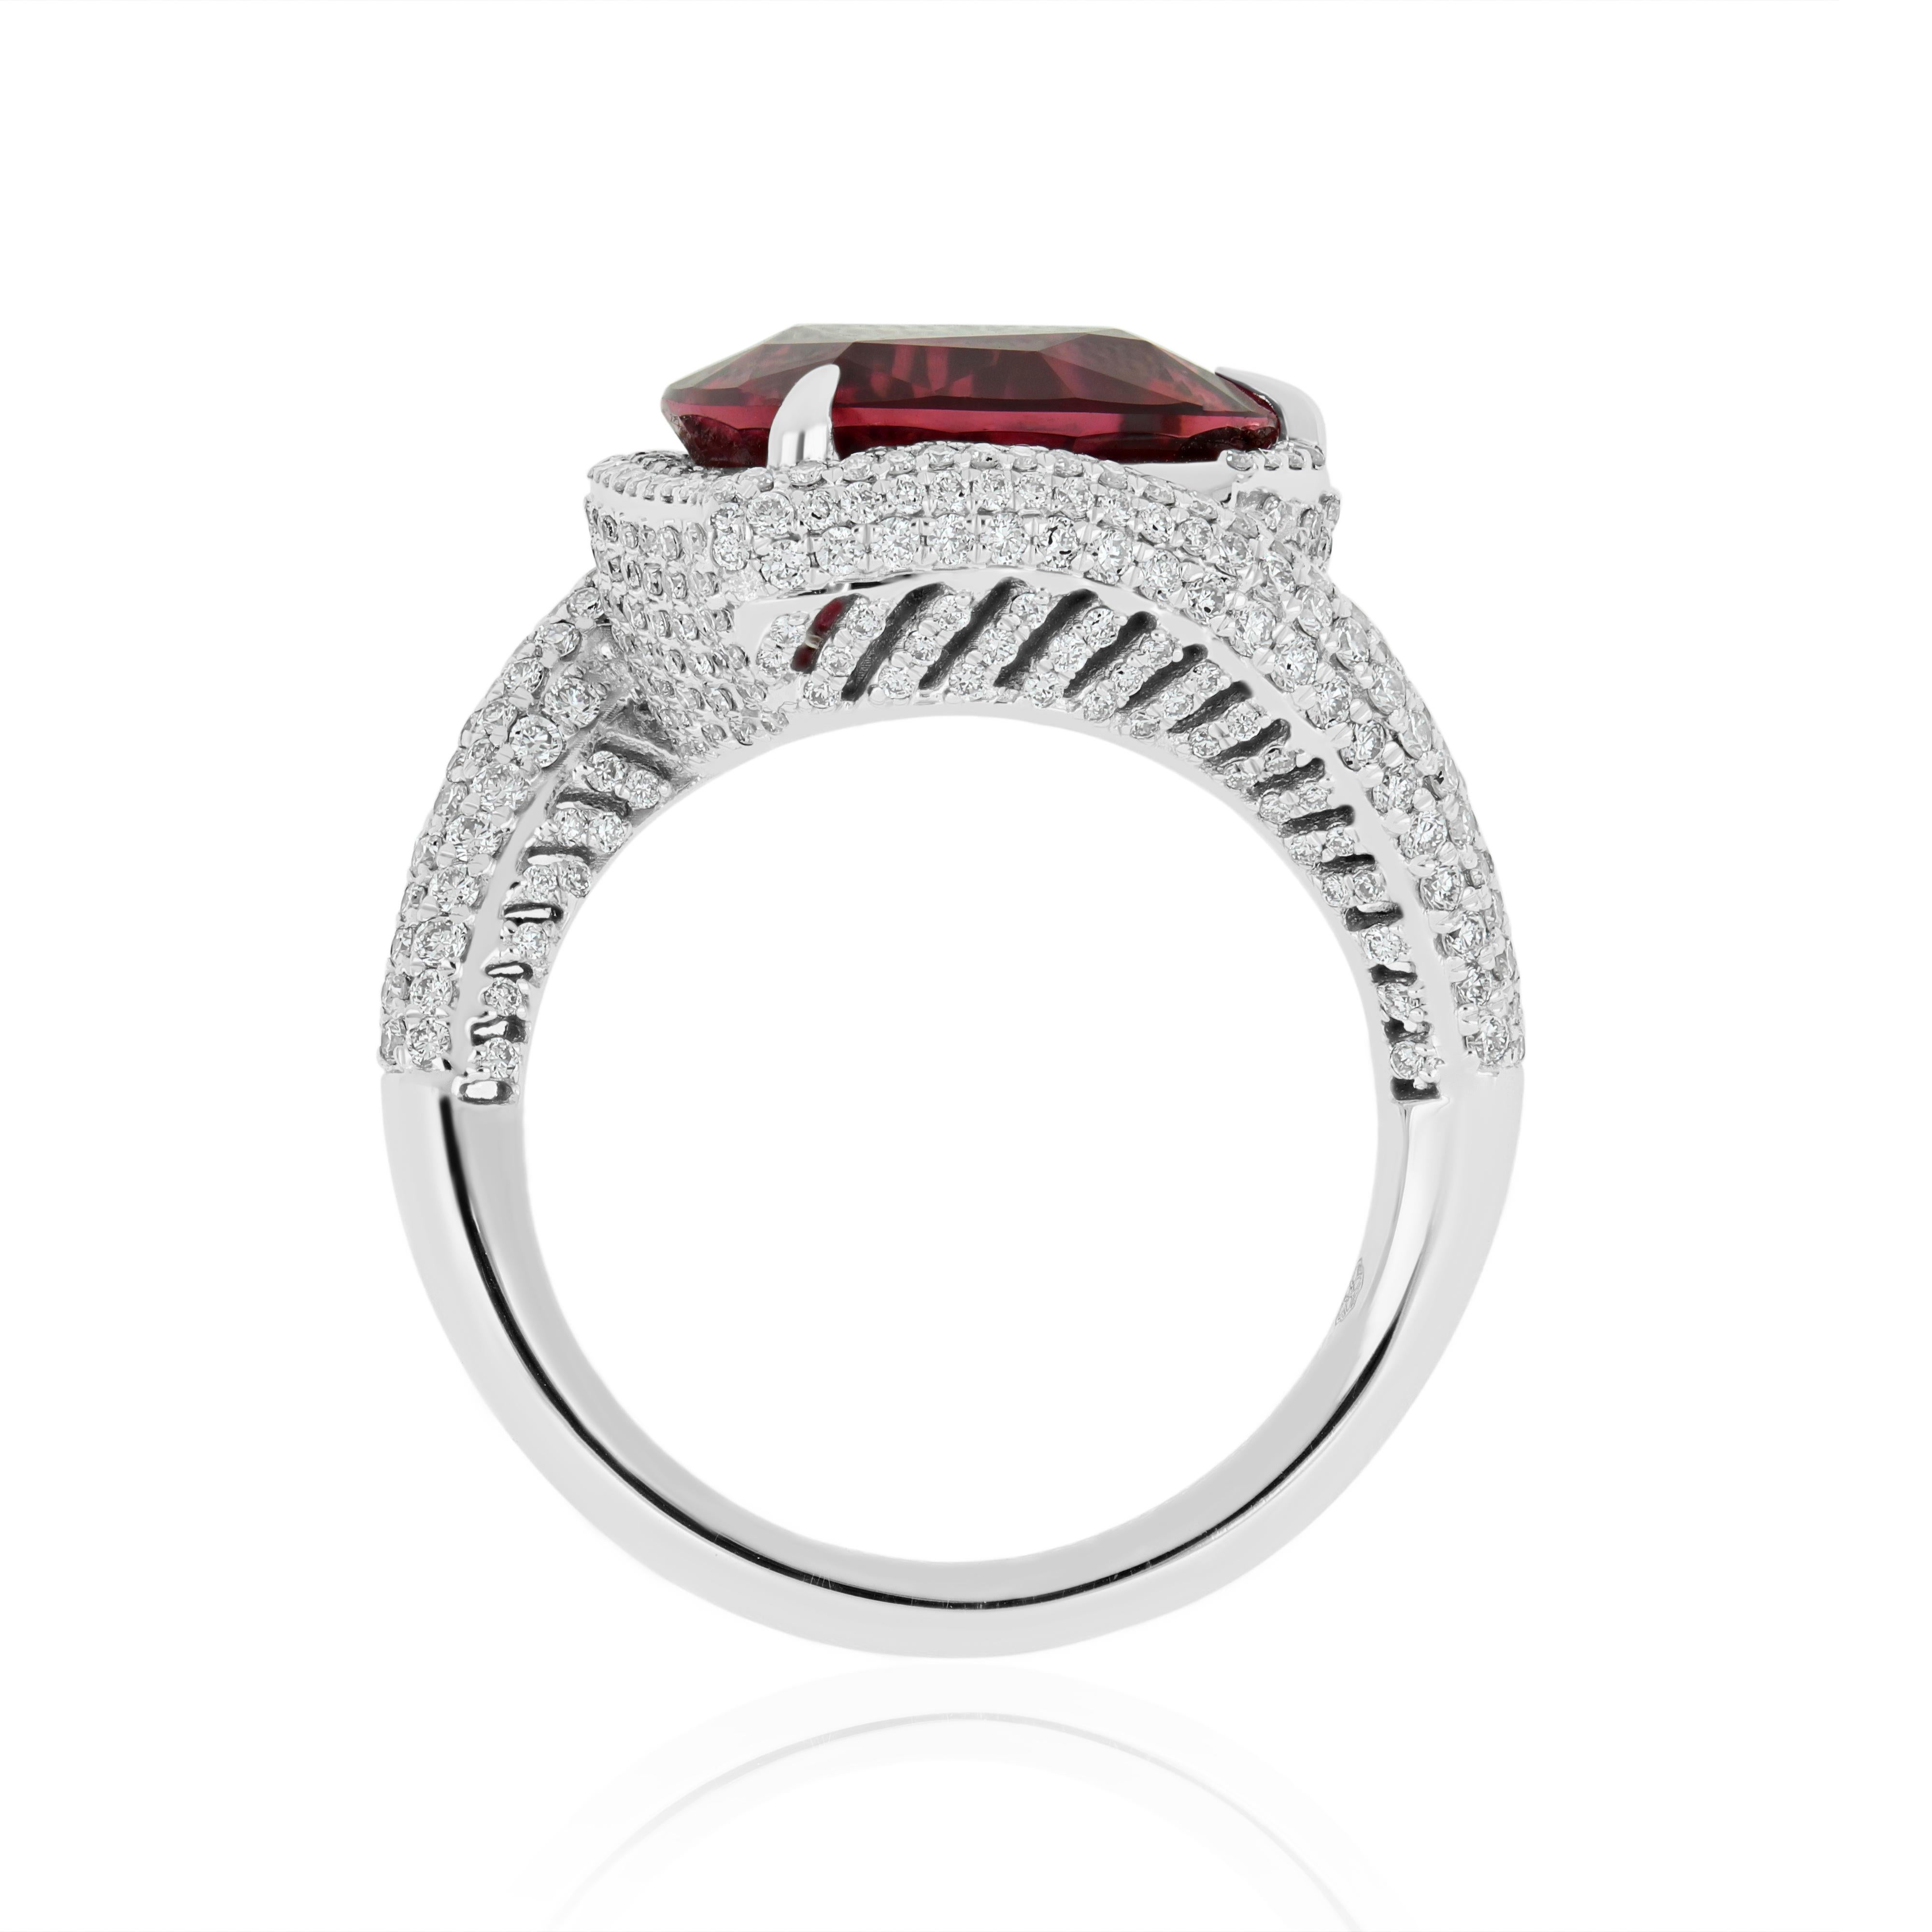 Women's 6.8 Carats Rubellite and Diamond Studded Ring in 18K White Gold Ring For Sale